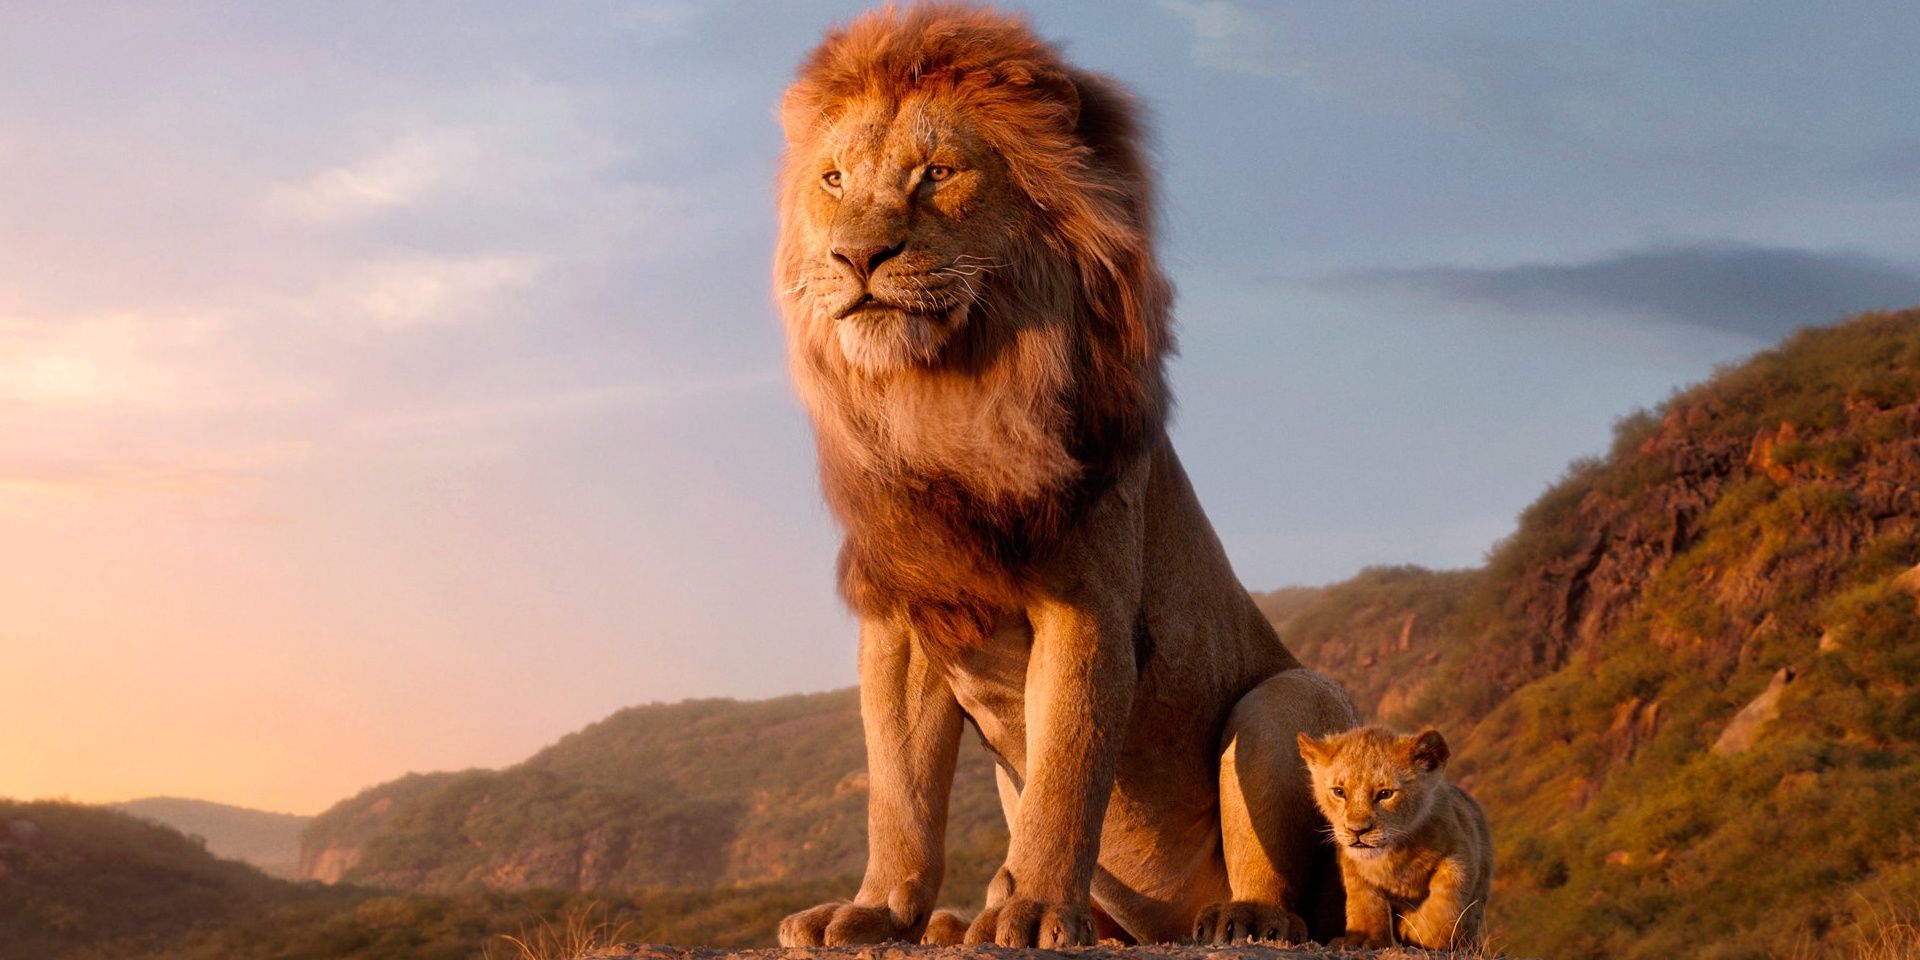 Baby Simba sits on a rock next to his father in The Lion King